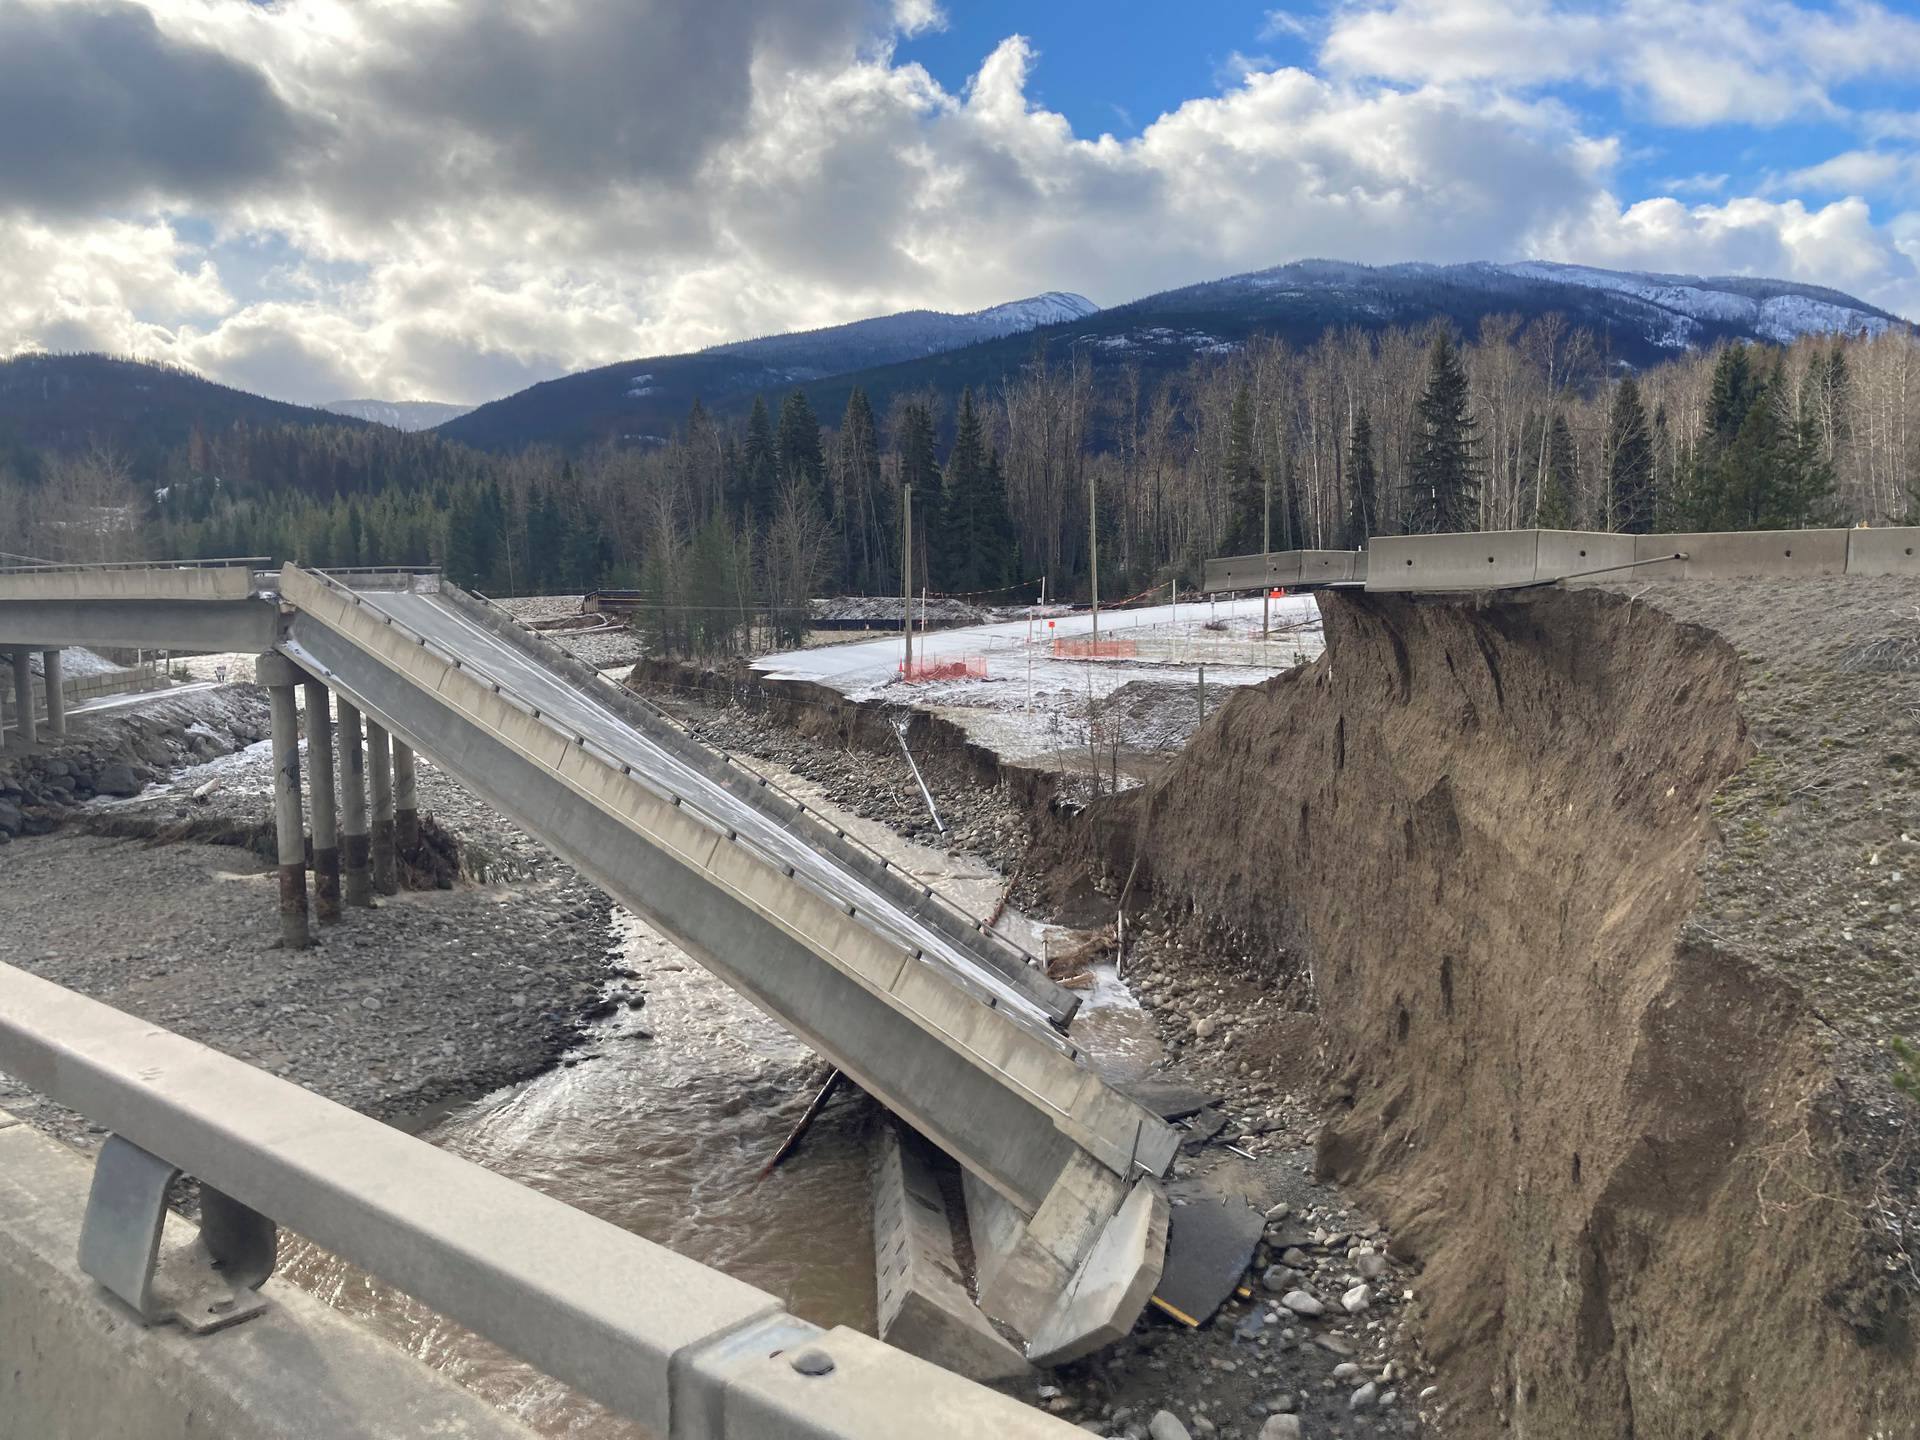 A view shows the damaged Coquihalla Highway 5 after mudslides near Coldwater River Provincial Park, British Columbia